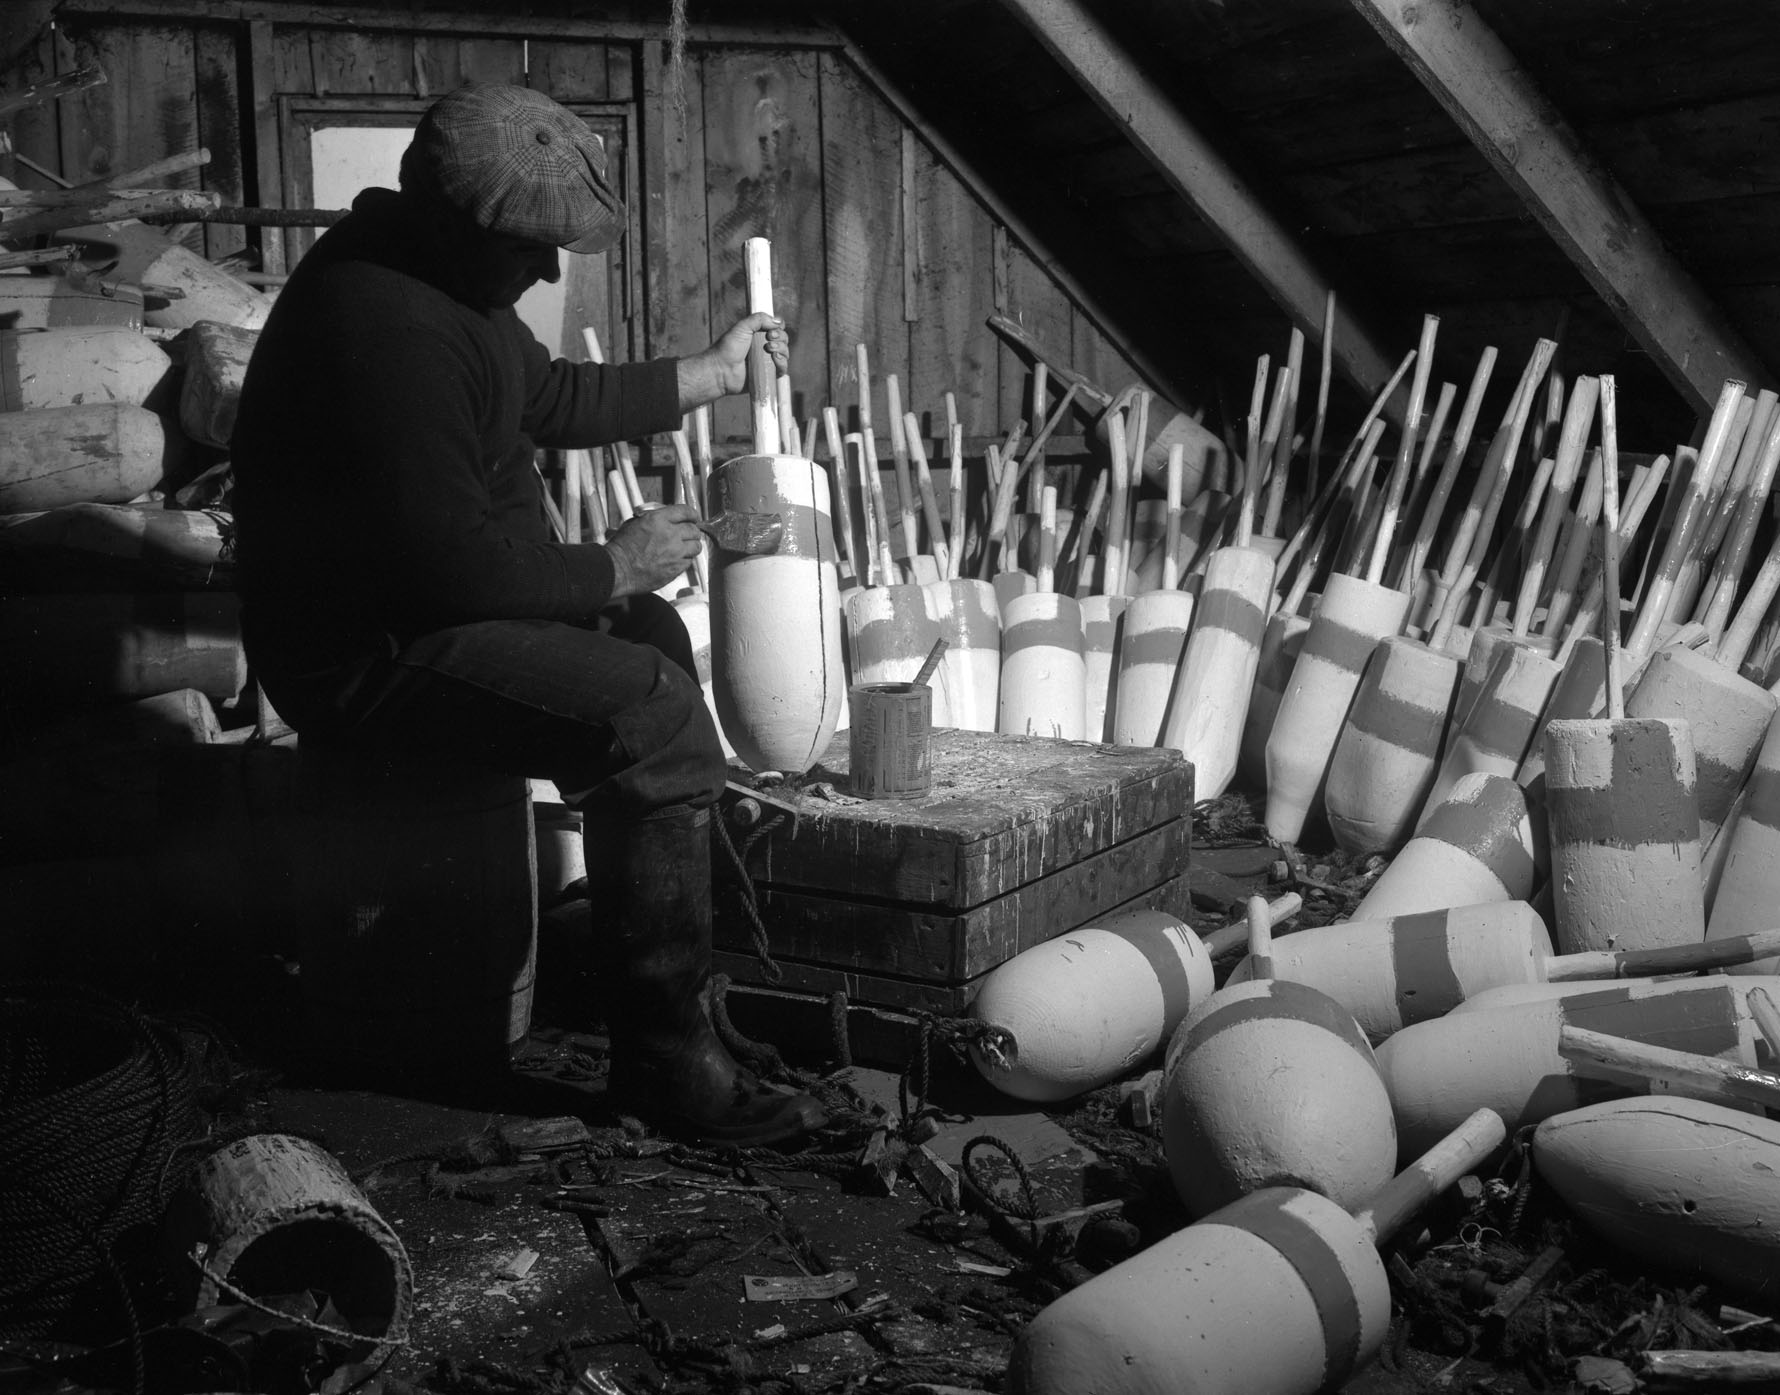 A fisherman paints buoys in his shed